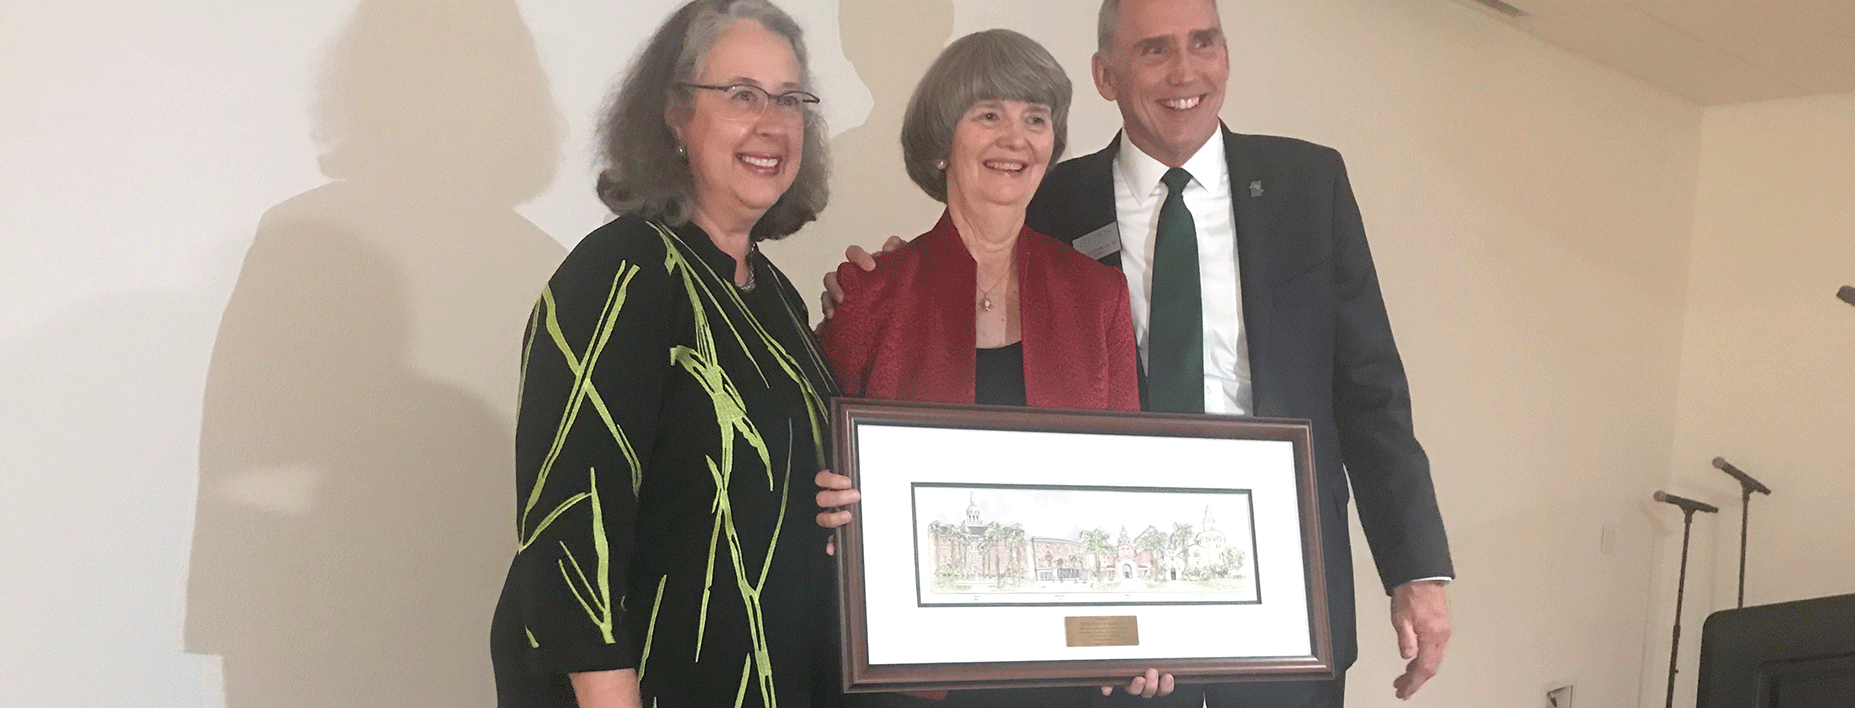 Wendy Libby and Joe Cooper honor Linda Davis, who stands holding a paintiing